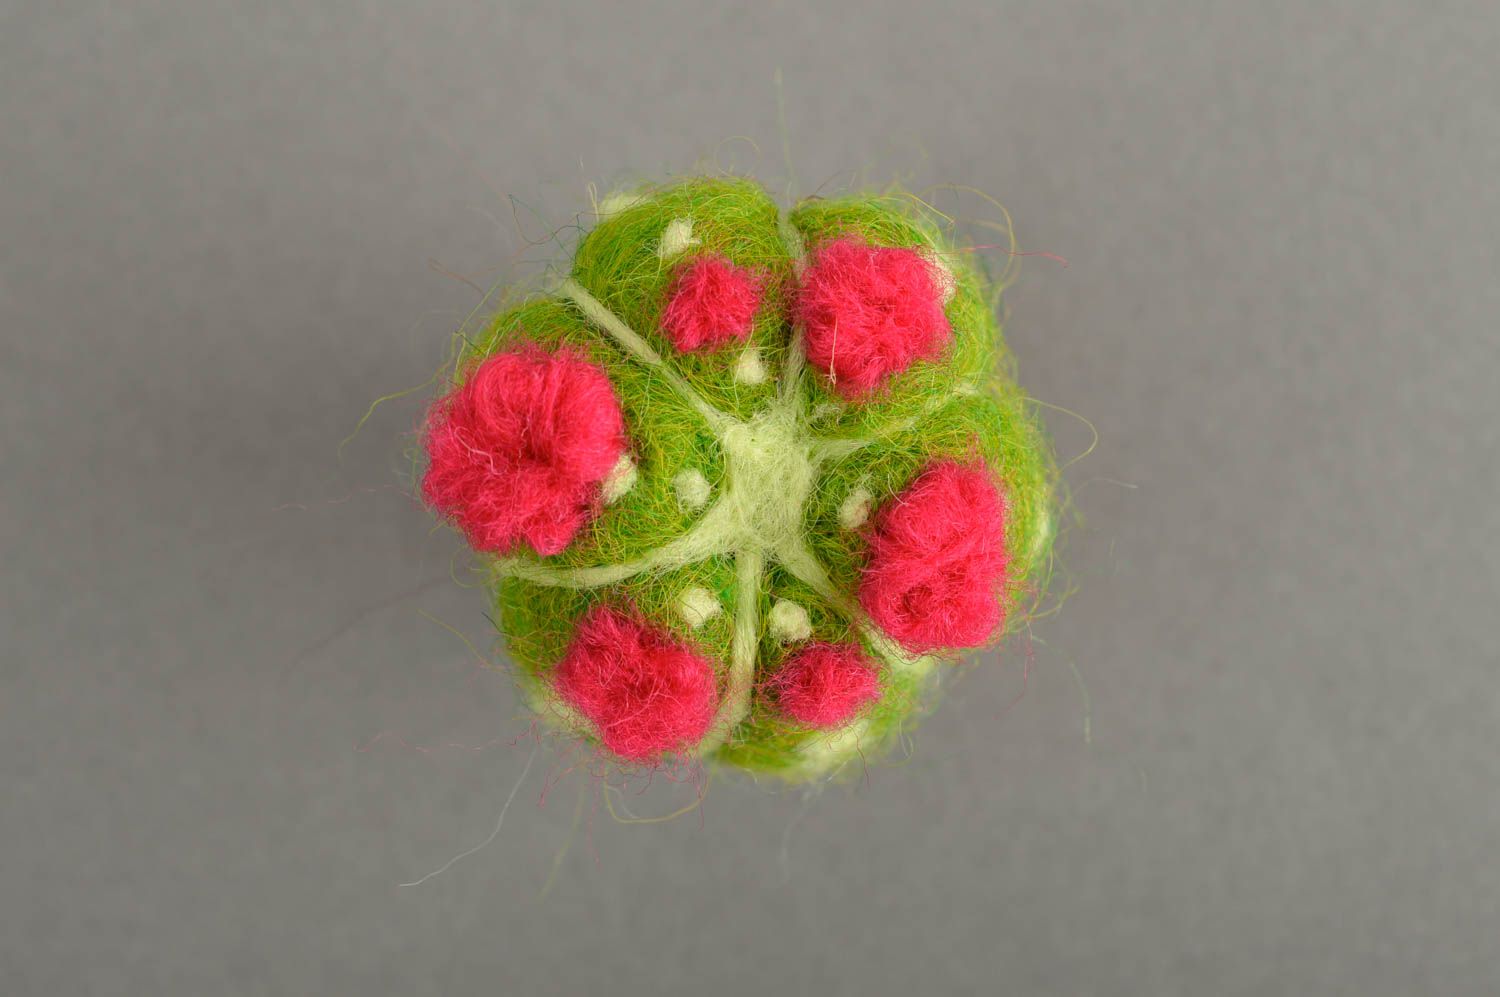 Handmade felted wool flowers home decoration gift ideas decorative use only photo 4